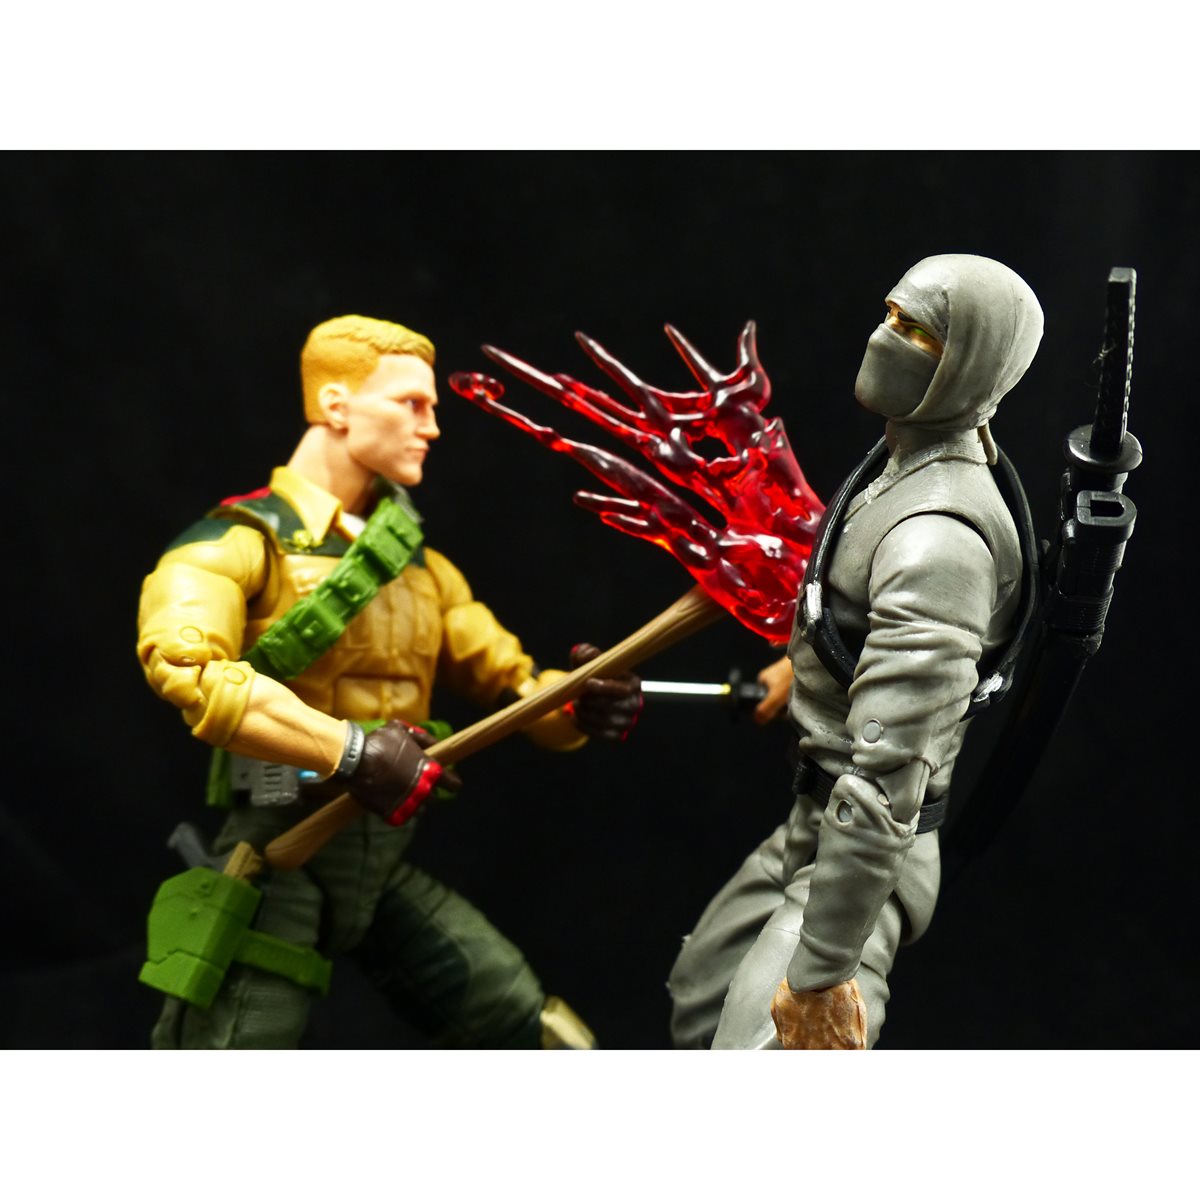 .com: Super Action Stuff 18 Piece Bag of Violence Series Action  Figure Accessories 1:12 for Five, Six and Seven inch Scale Action Figures.  Includes Weapons, Blood Splatters, Gore, Action Effects and More 